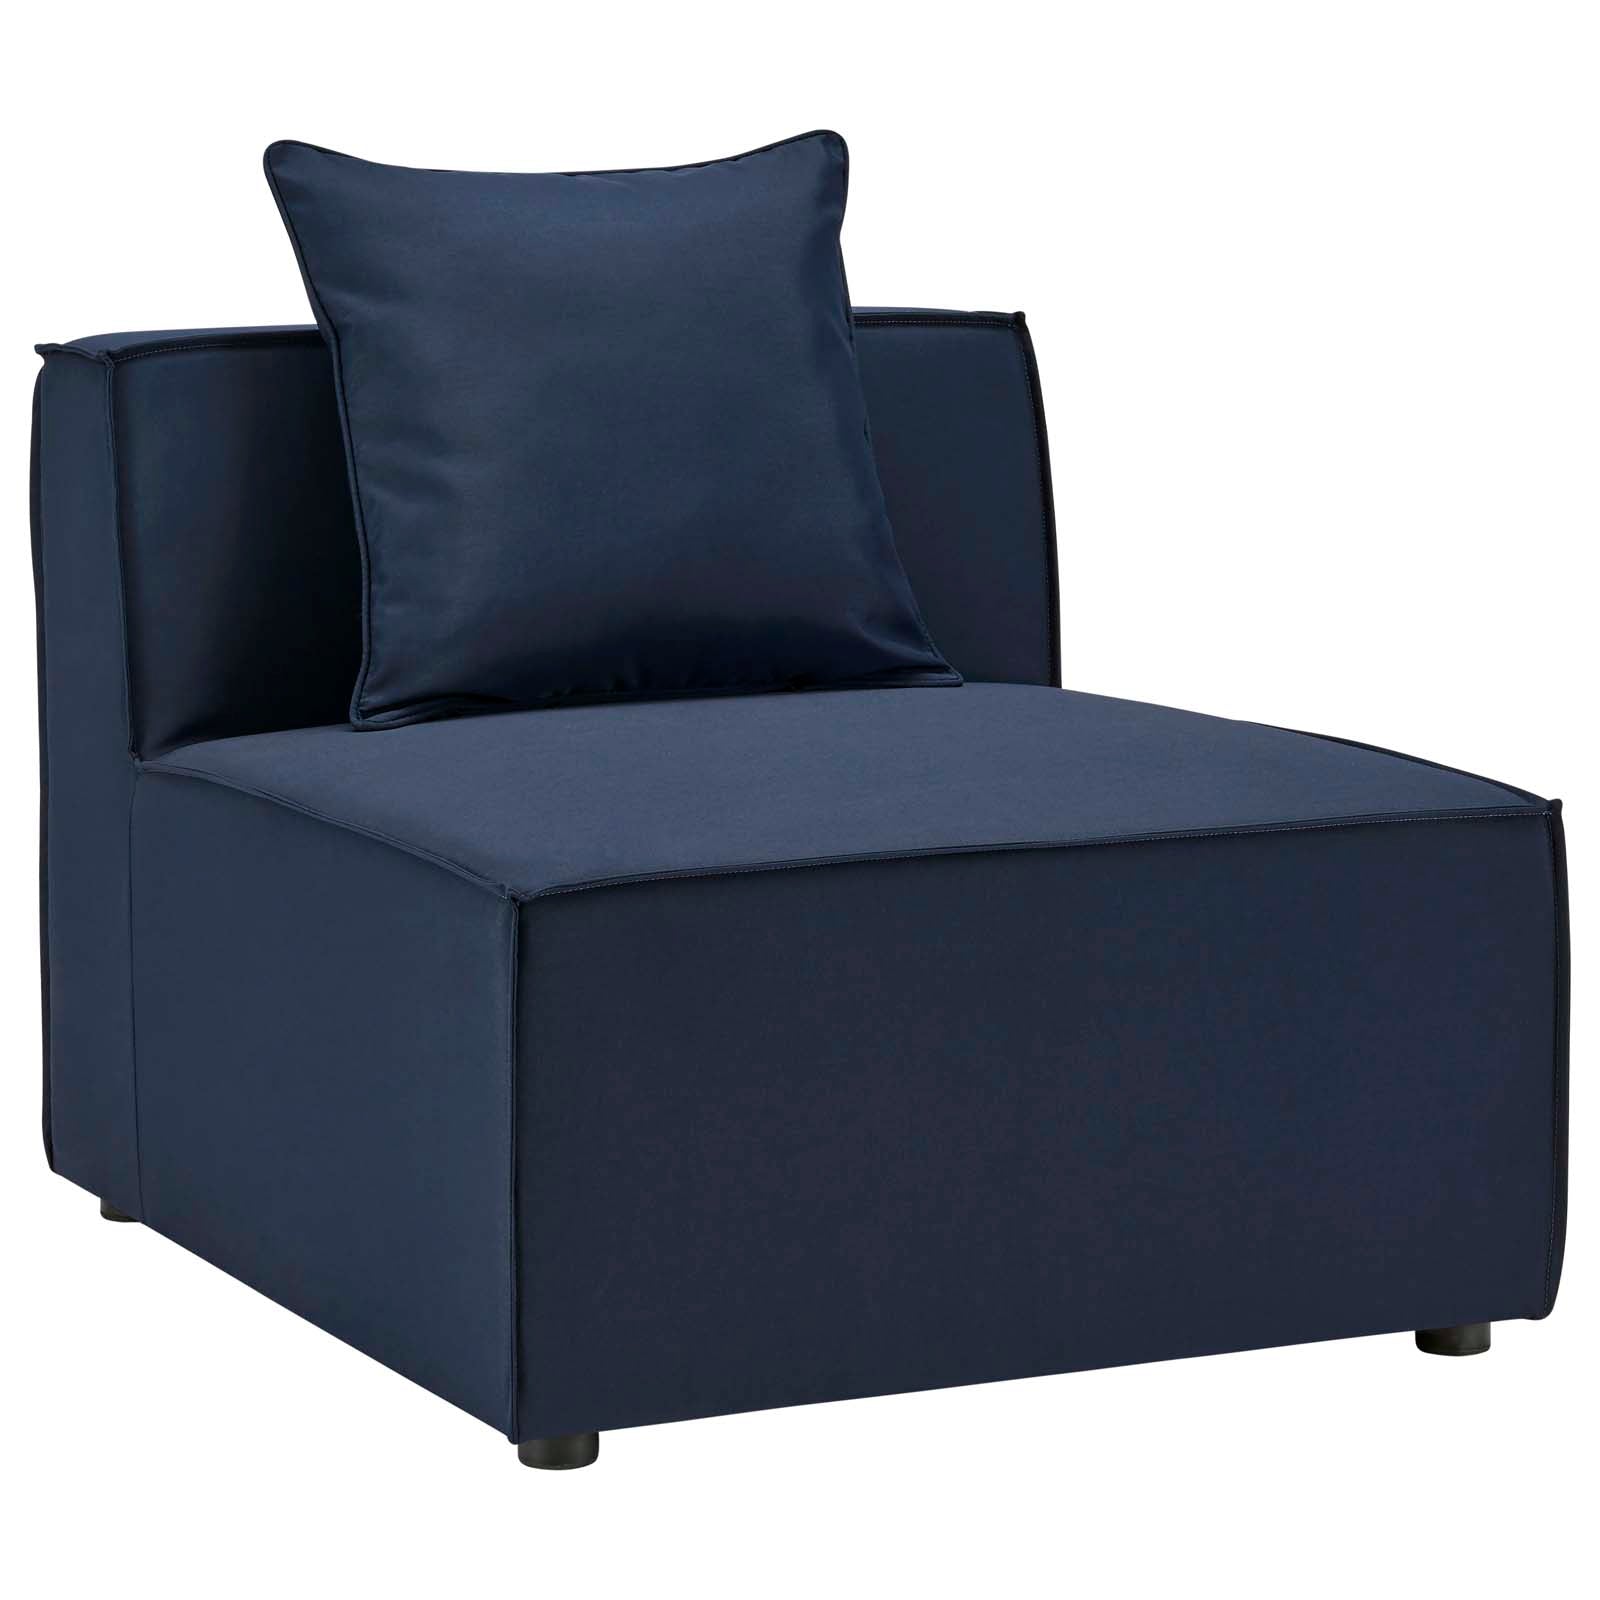 Modway Outdoor Sofas - Saybrook Outdoor Patio Upholstered 4-Piece Sectional Sofa Navy